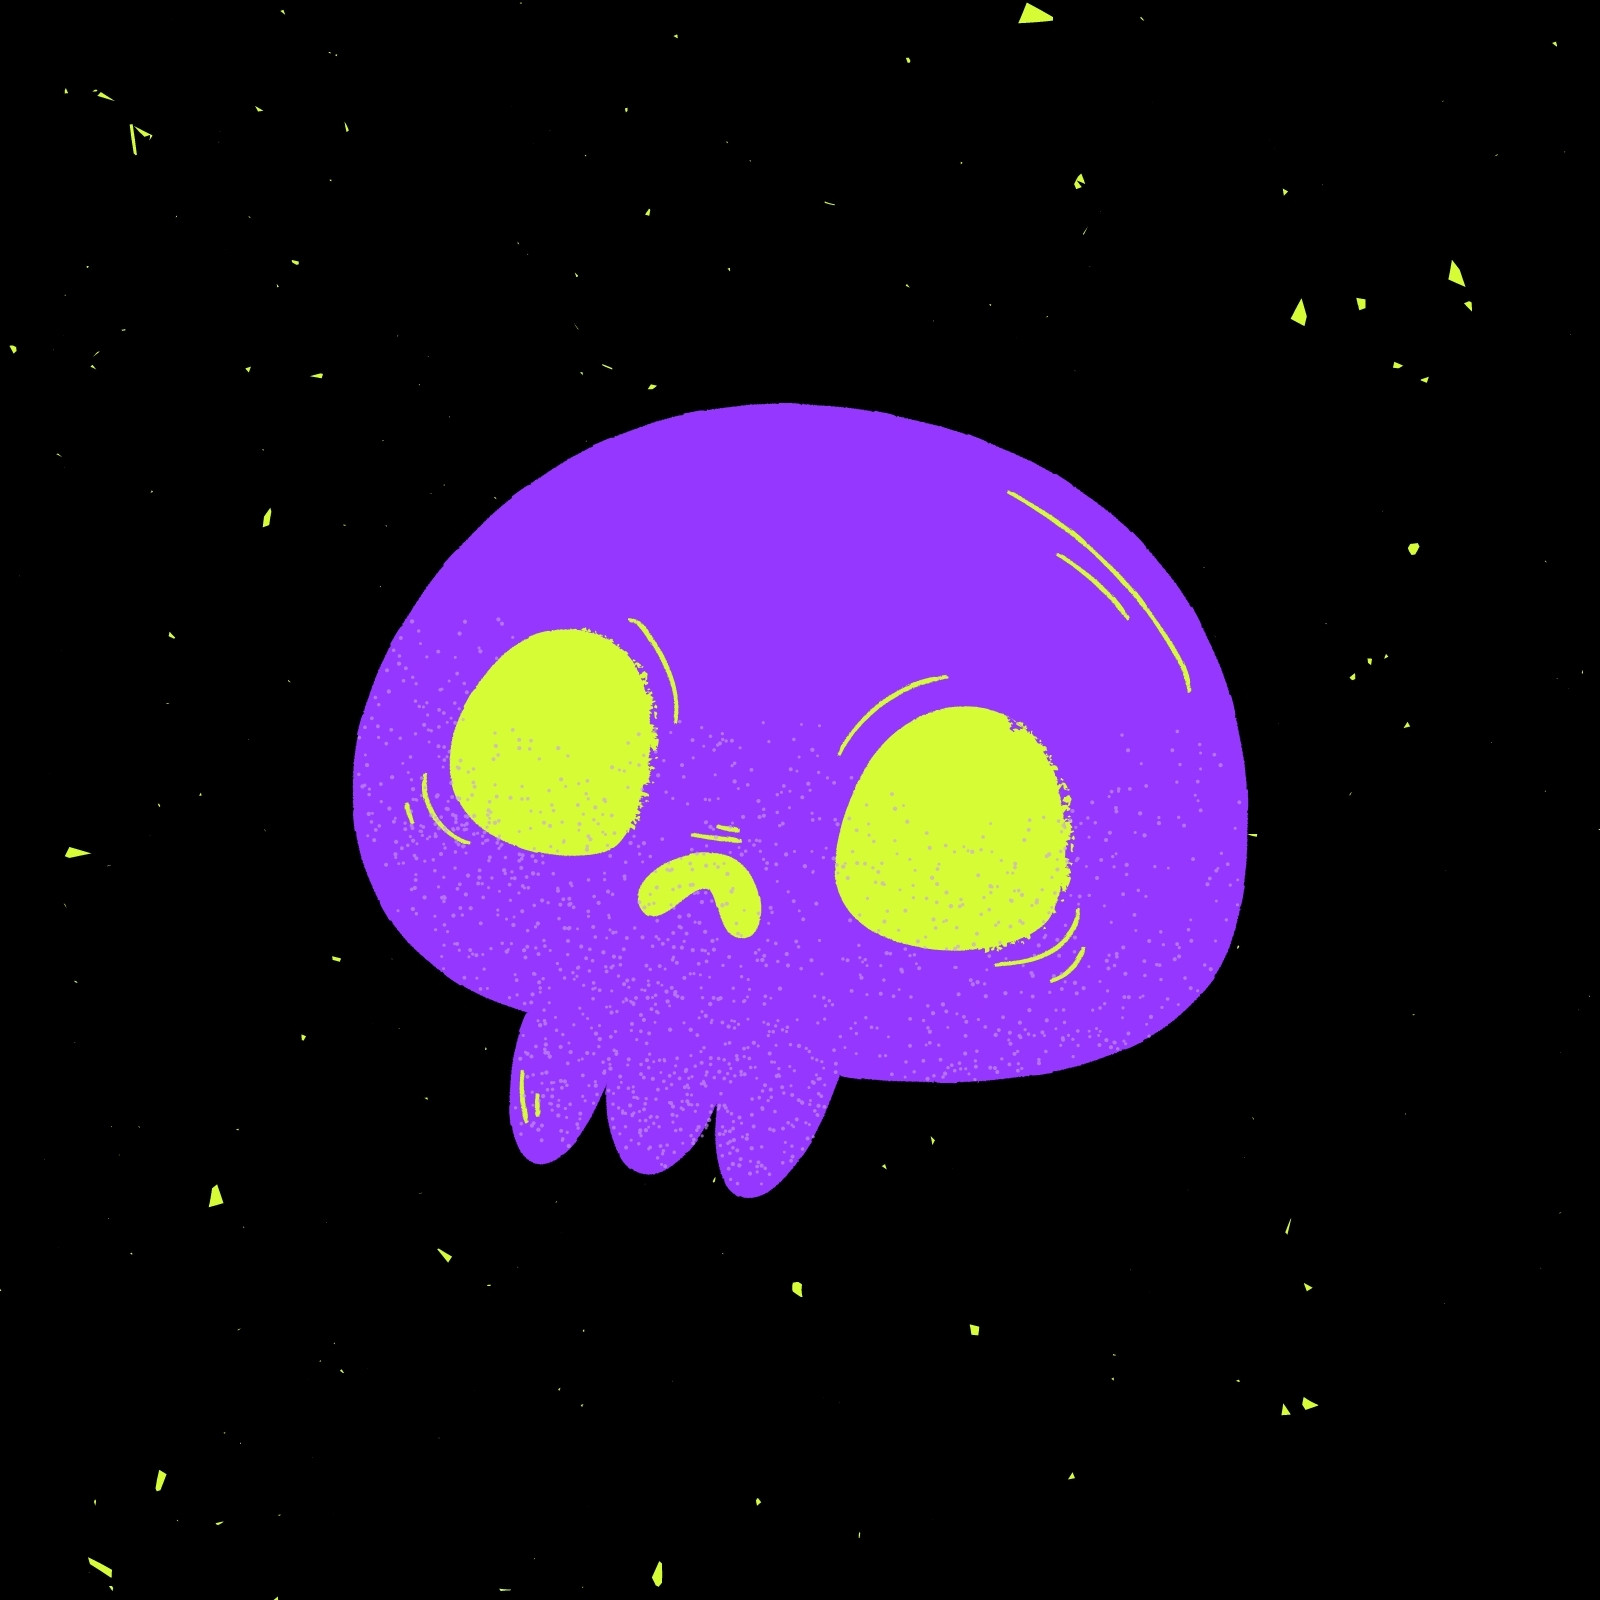 A purple skull with yellow eyes on black background - Alien